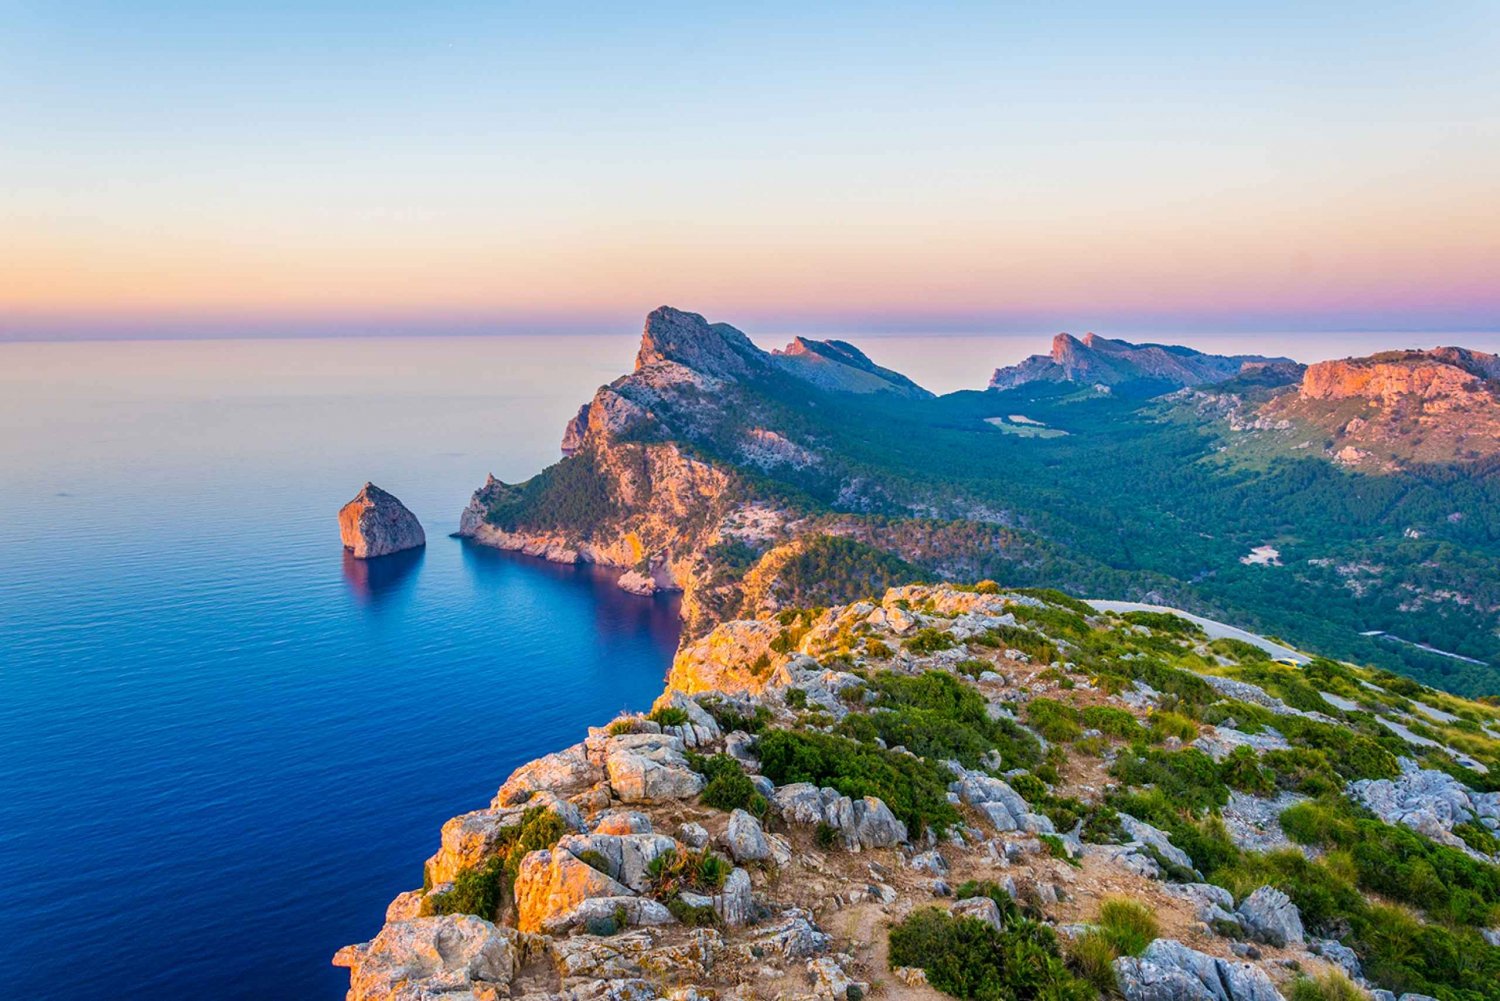 Formentor: Xperience Cabrio Bus and Boat Tour from the North